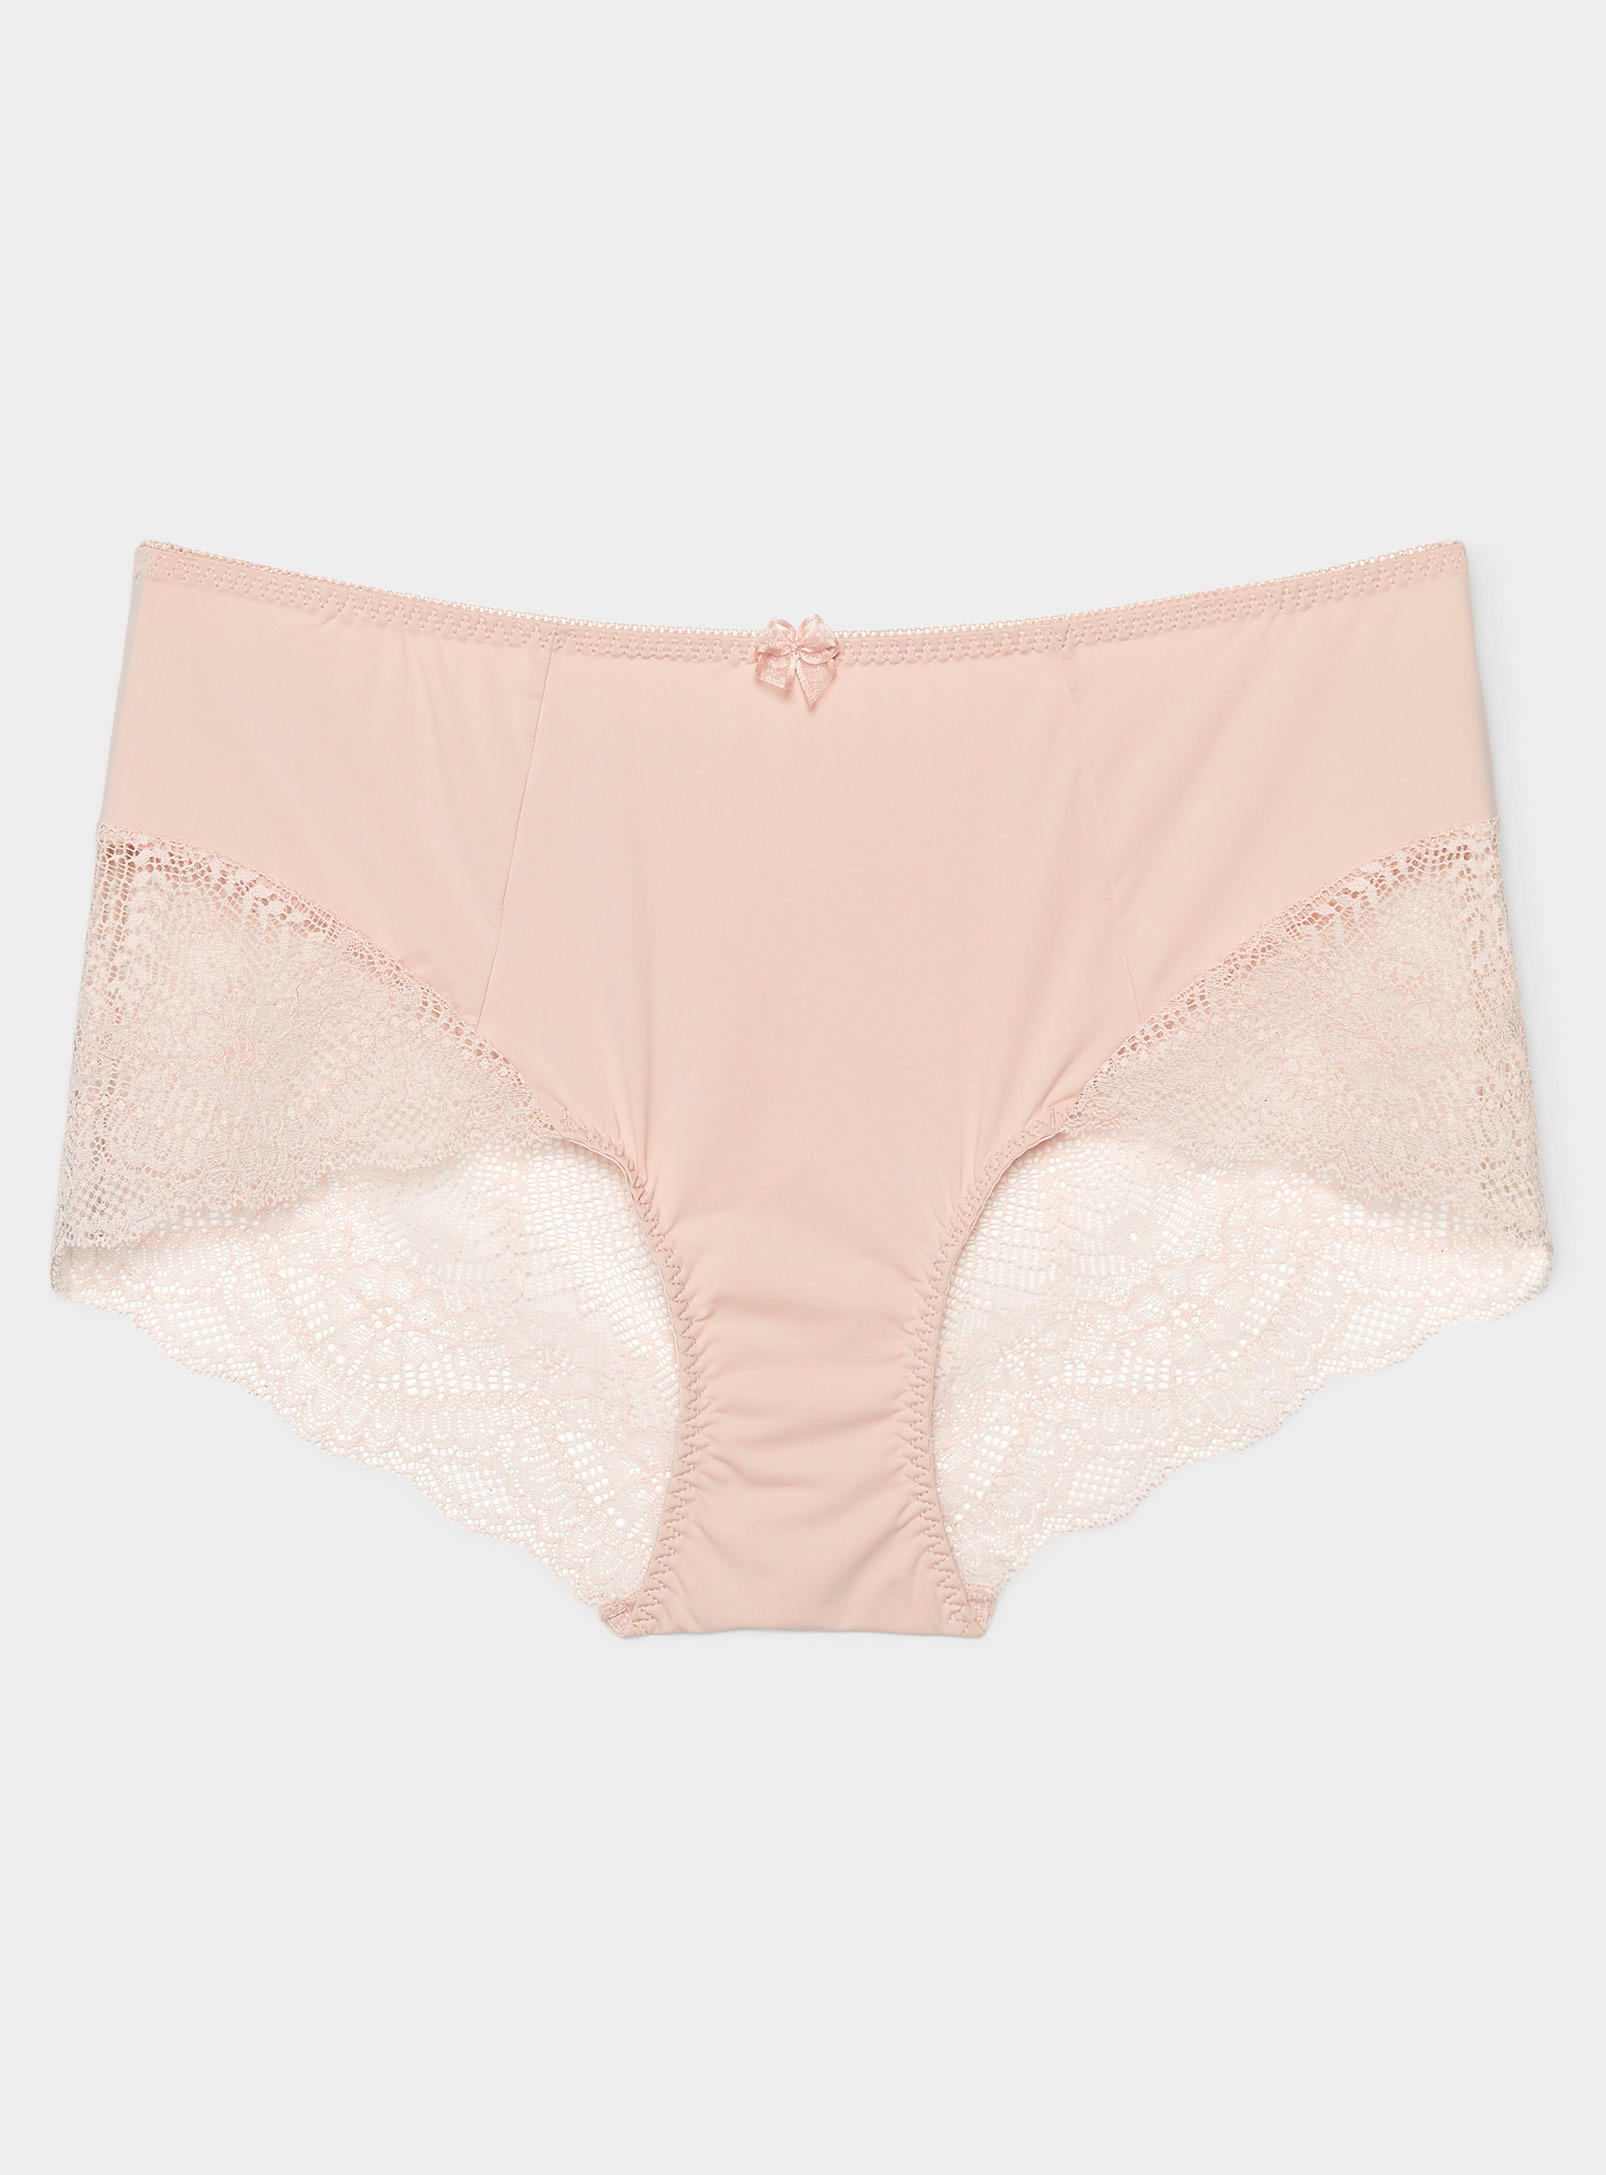 Wonderbra Lace Inserts Recycled Nylon Hipster In Dusky Pink